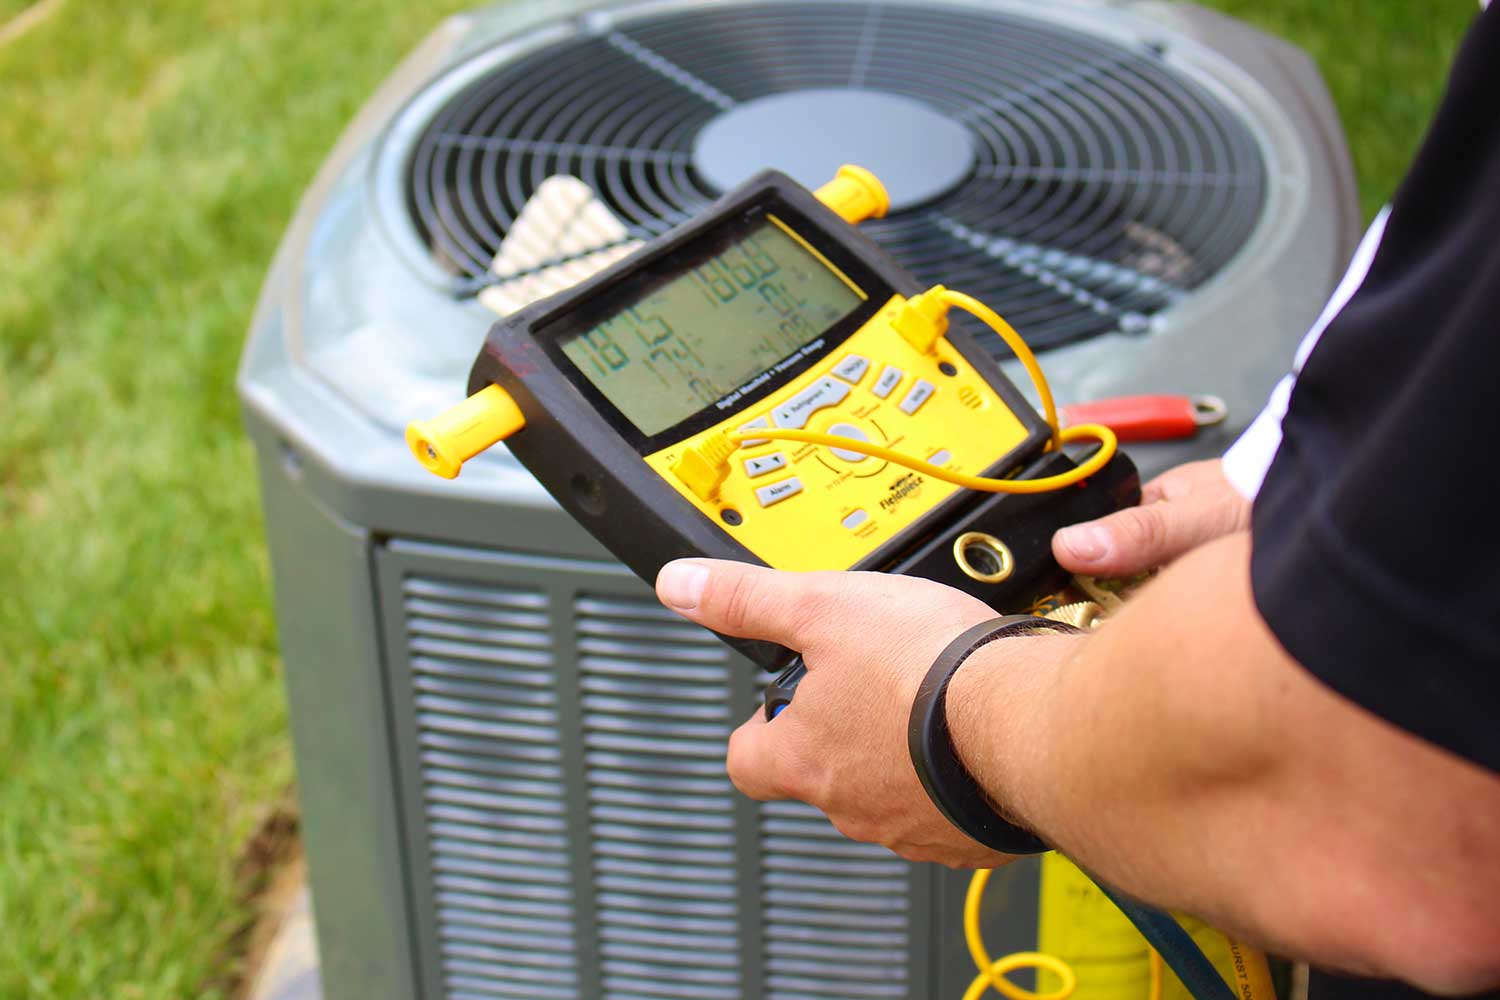 Listing priorities with your HVAC system at the top